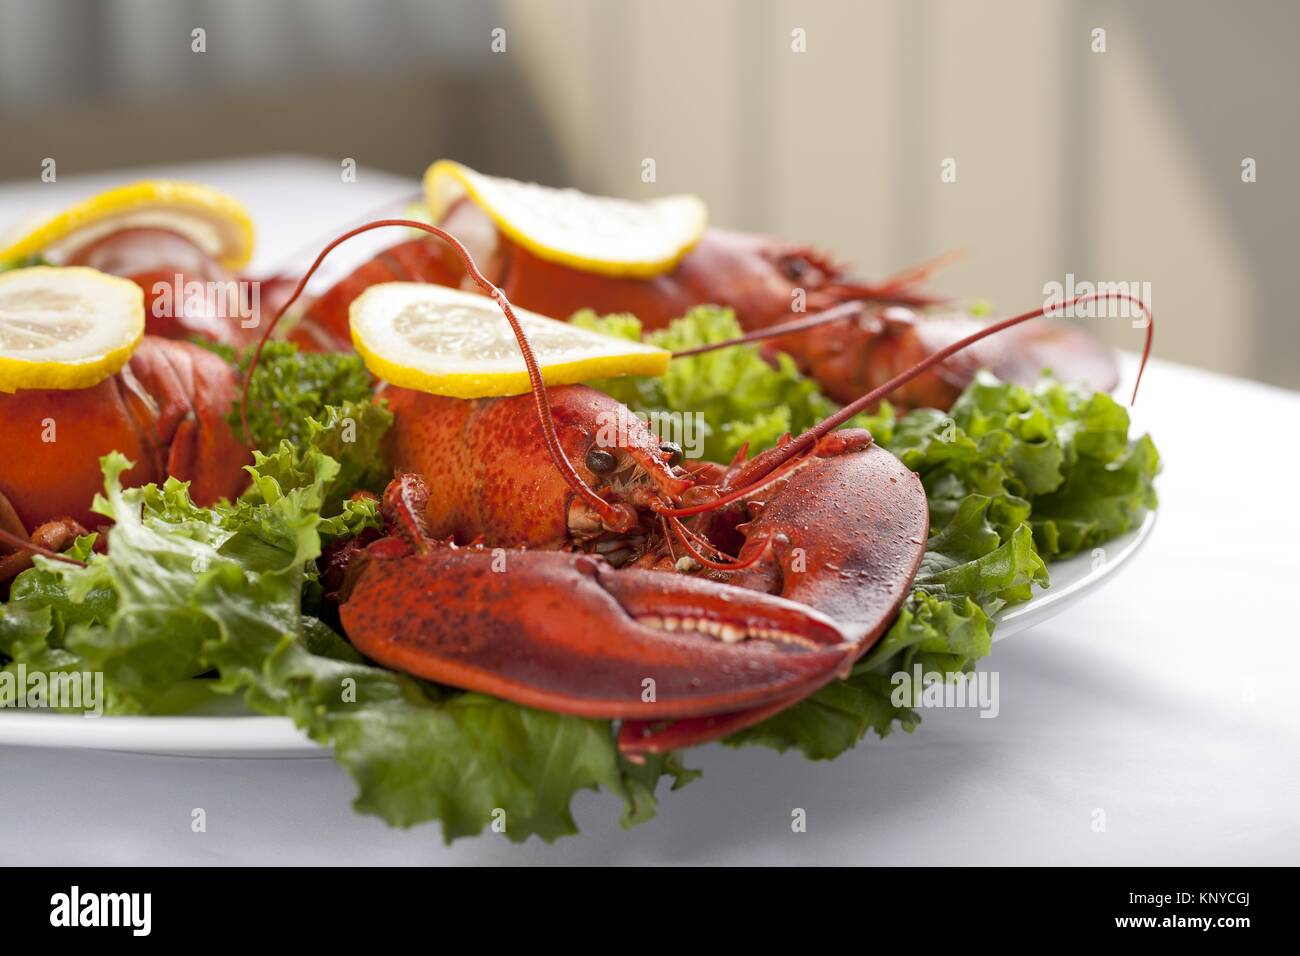 a plate with green salad and lobster Stock Photo